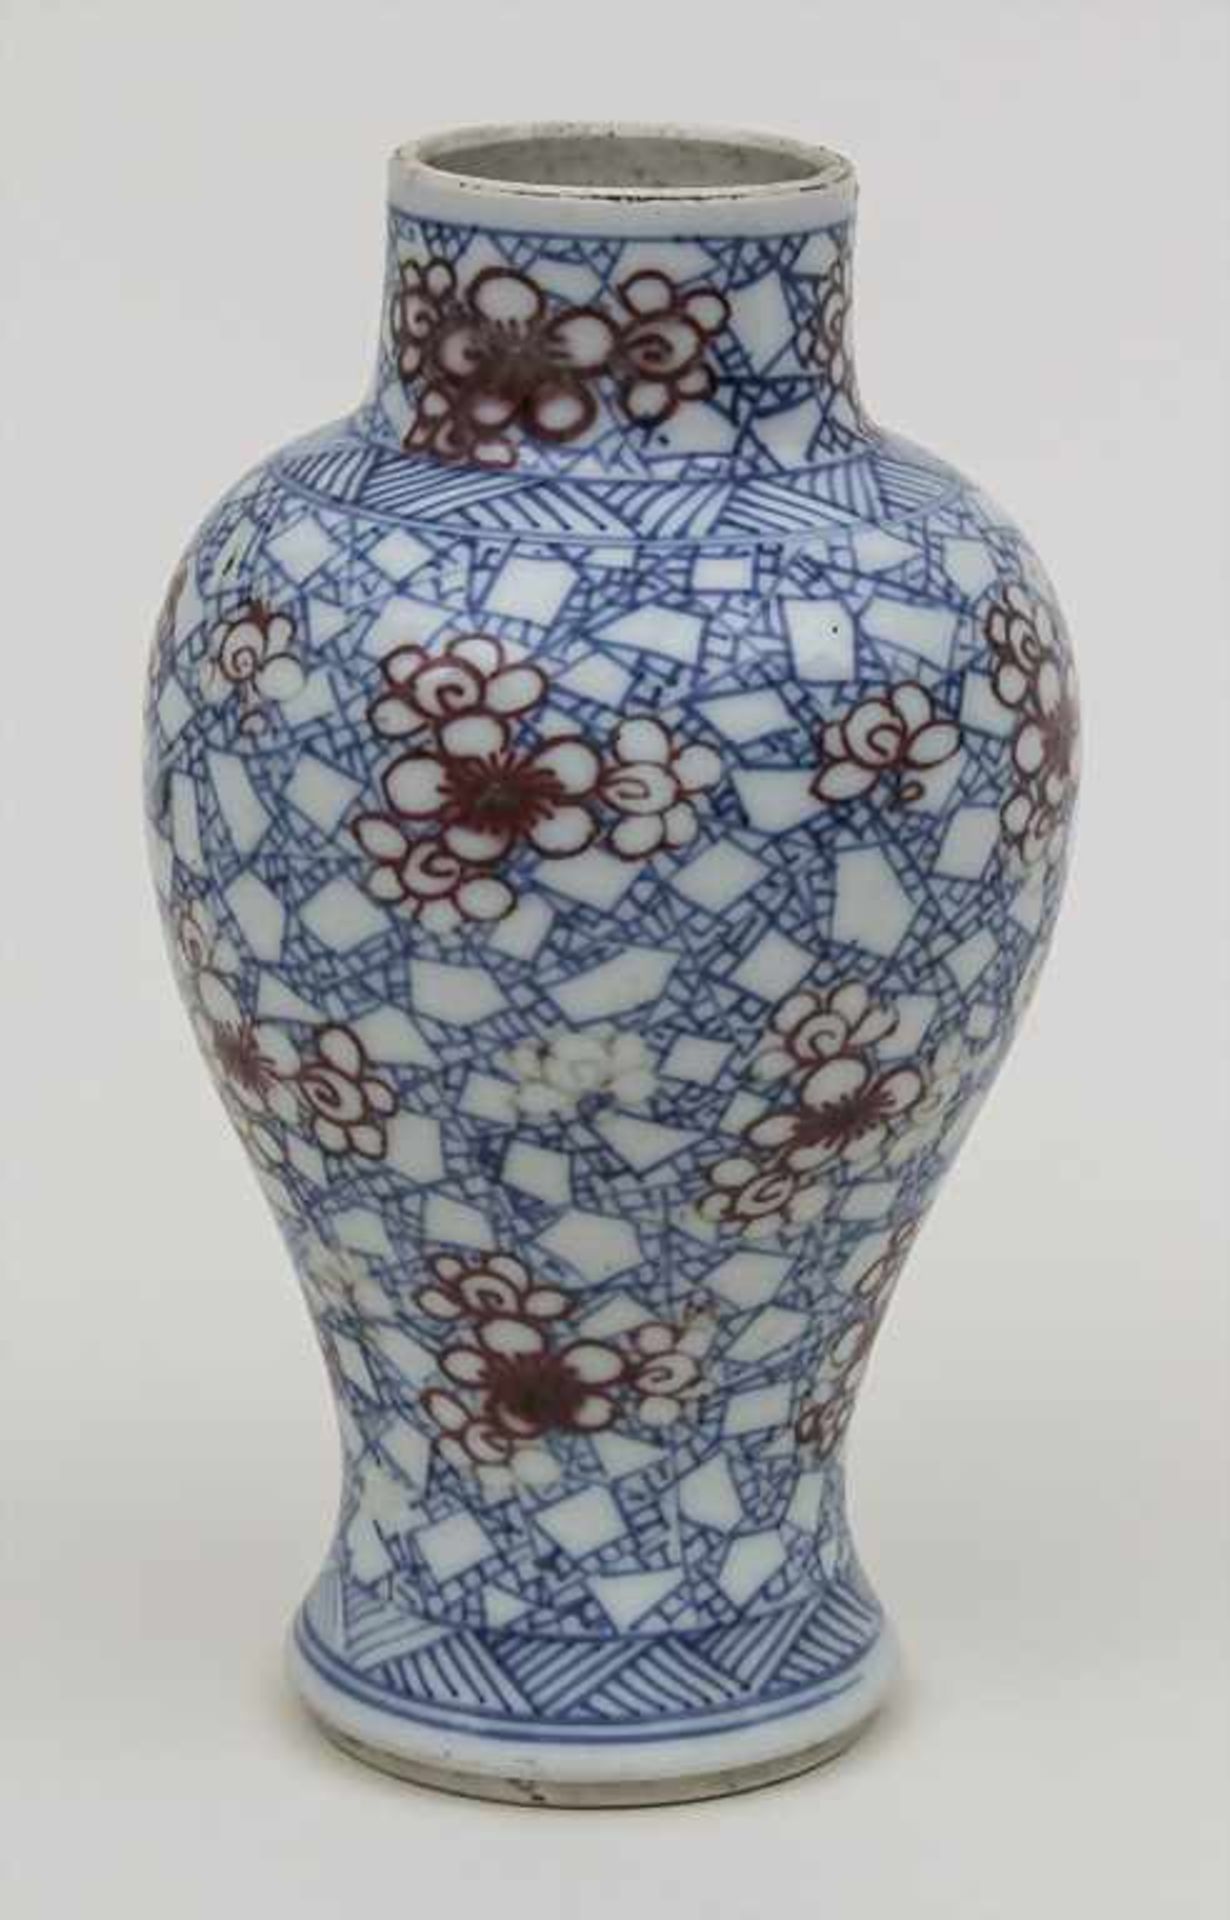 Ziervase mit eisenroter Blütenmalerei / A decorative vase with red flower painting, China, 18. Jh.